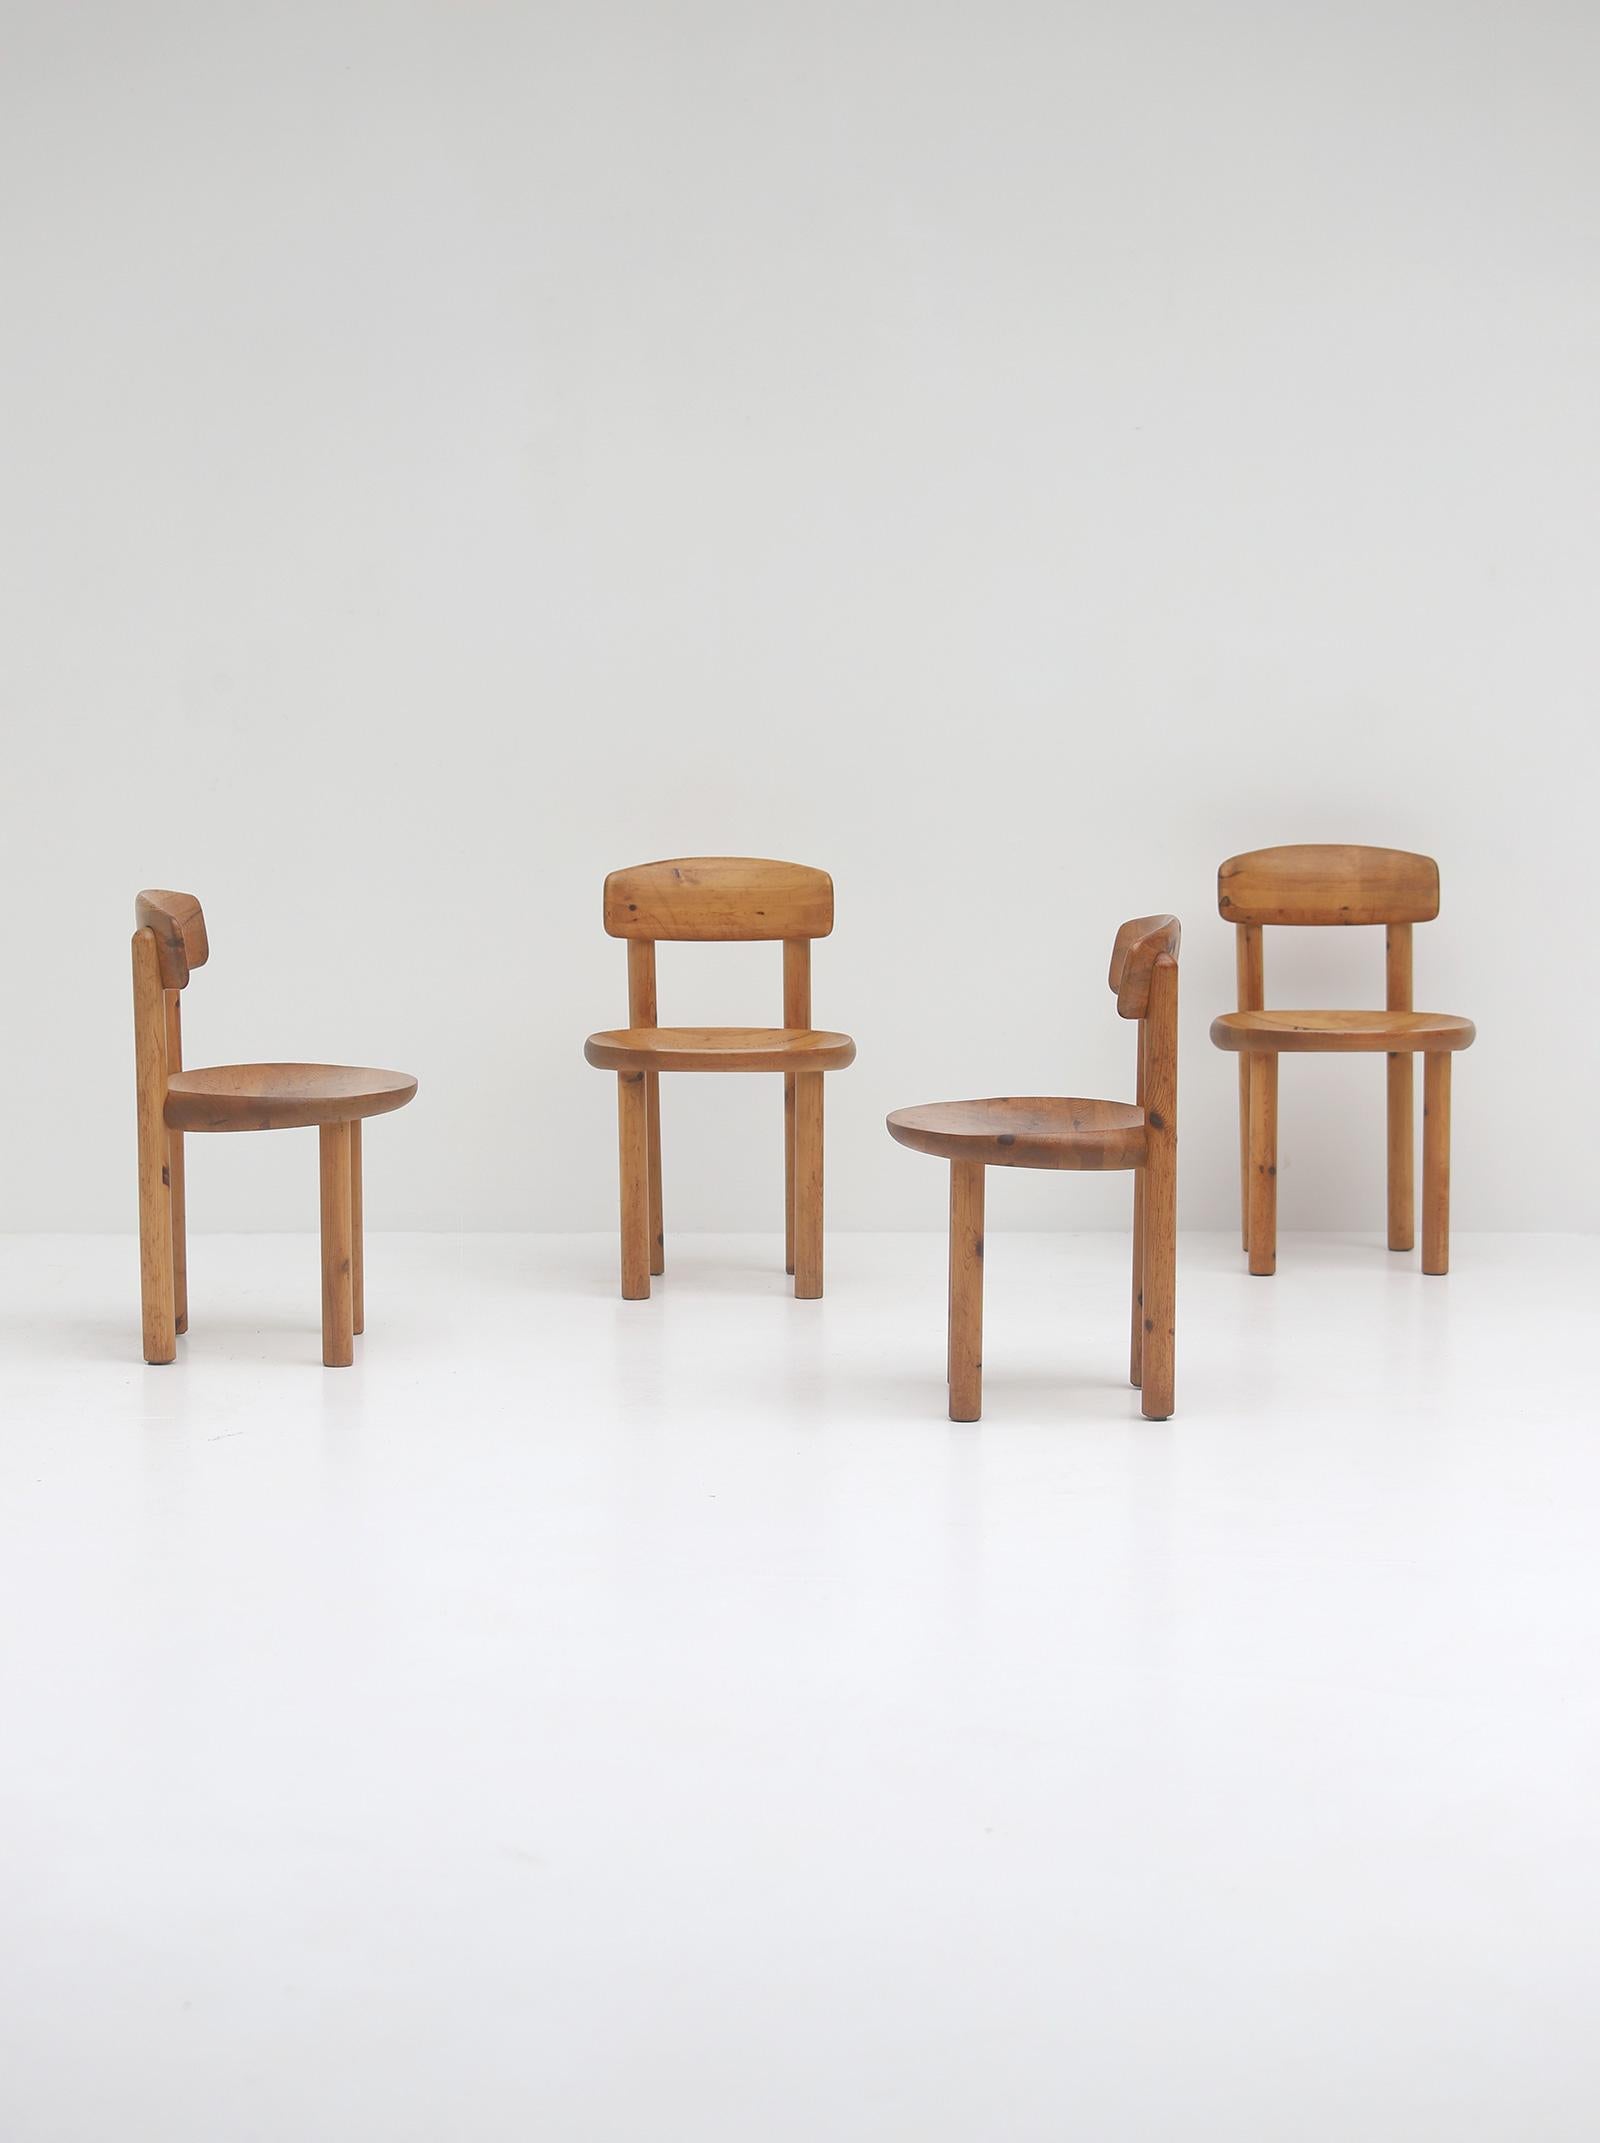 Set of 5 dining chairs designed by Swedish designer Rainer Daumiller and manufactured by Hirtshals Sawmill in Denmark, circa 1970. This set is made in the highest quality solid pinewood. The chairs have gained a nice patina through the years and